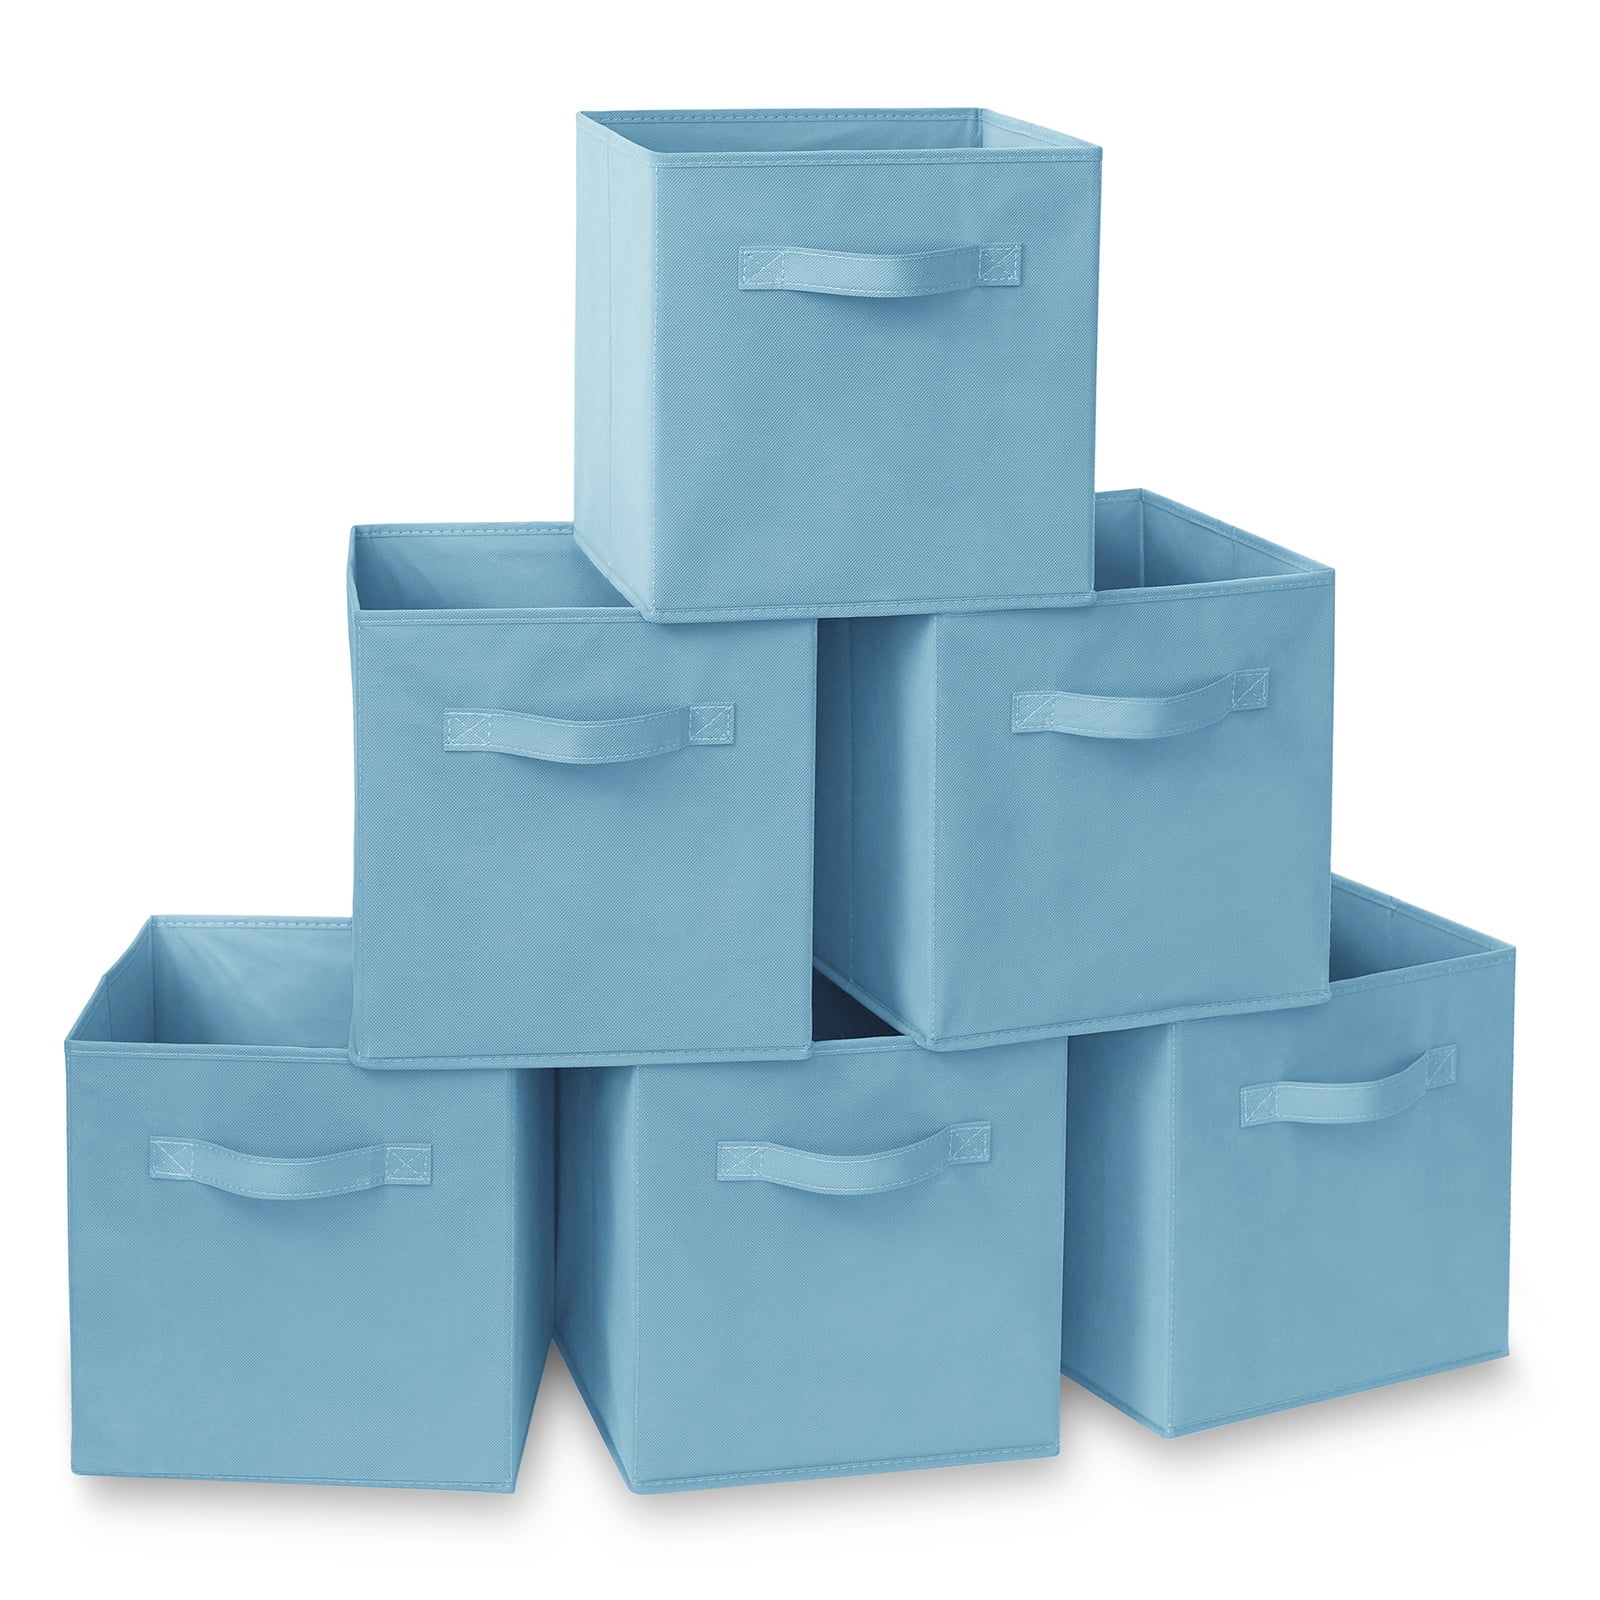 Grey Foldable Fabric Storage Bins Household Essentials Set of 6 Cubby Cubes 